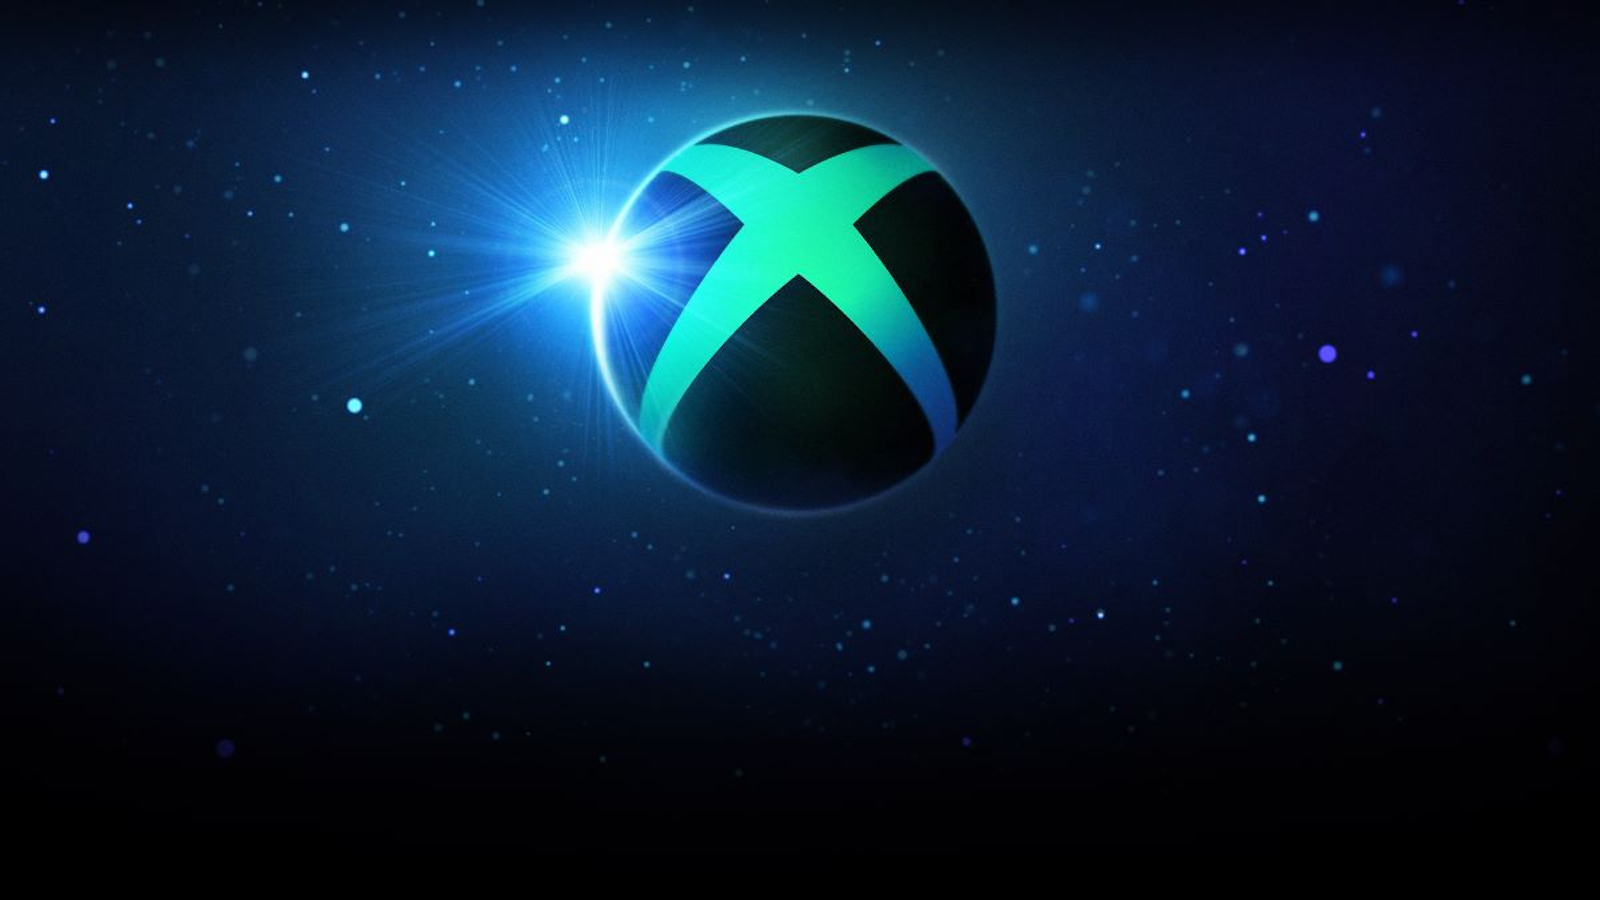 Xbox To Have A Major Showcase In Early 2023, Claims Industry Insider